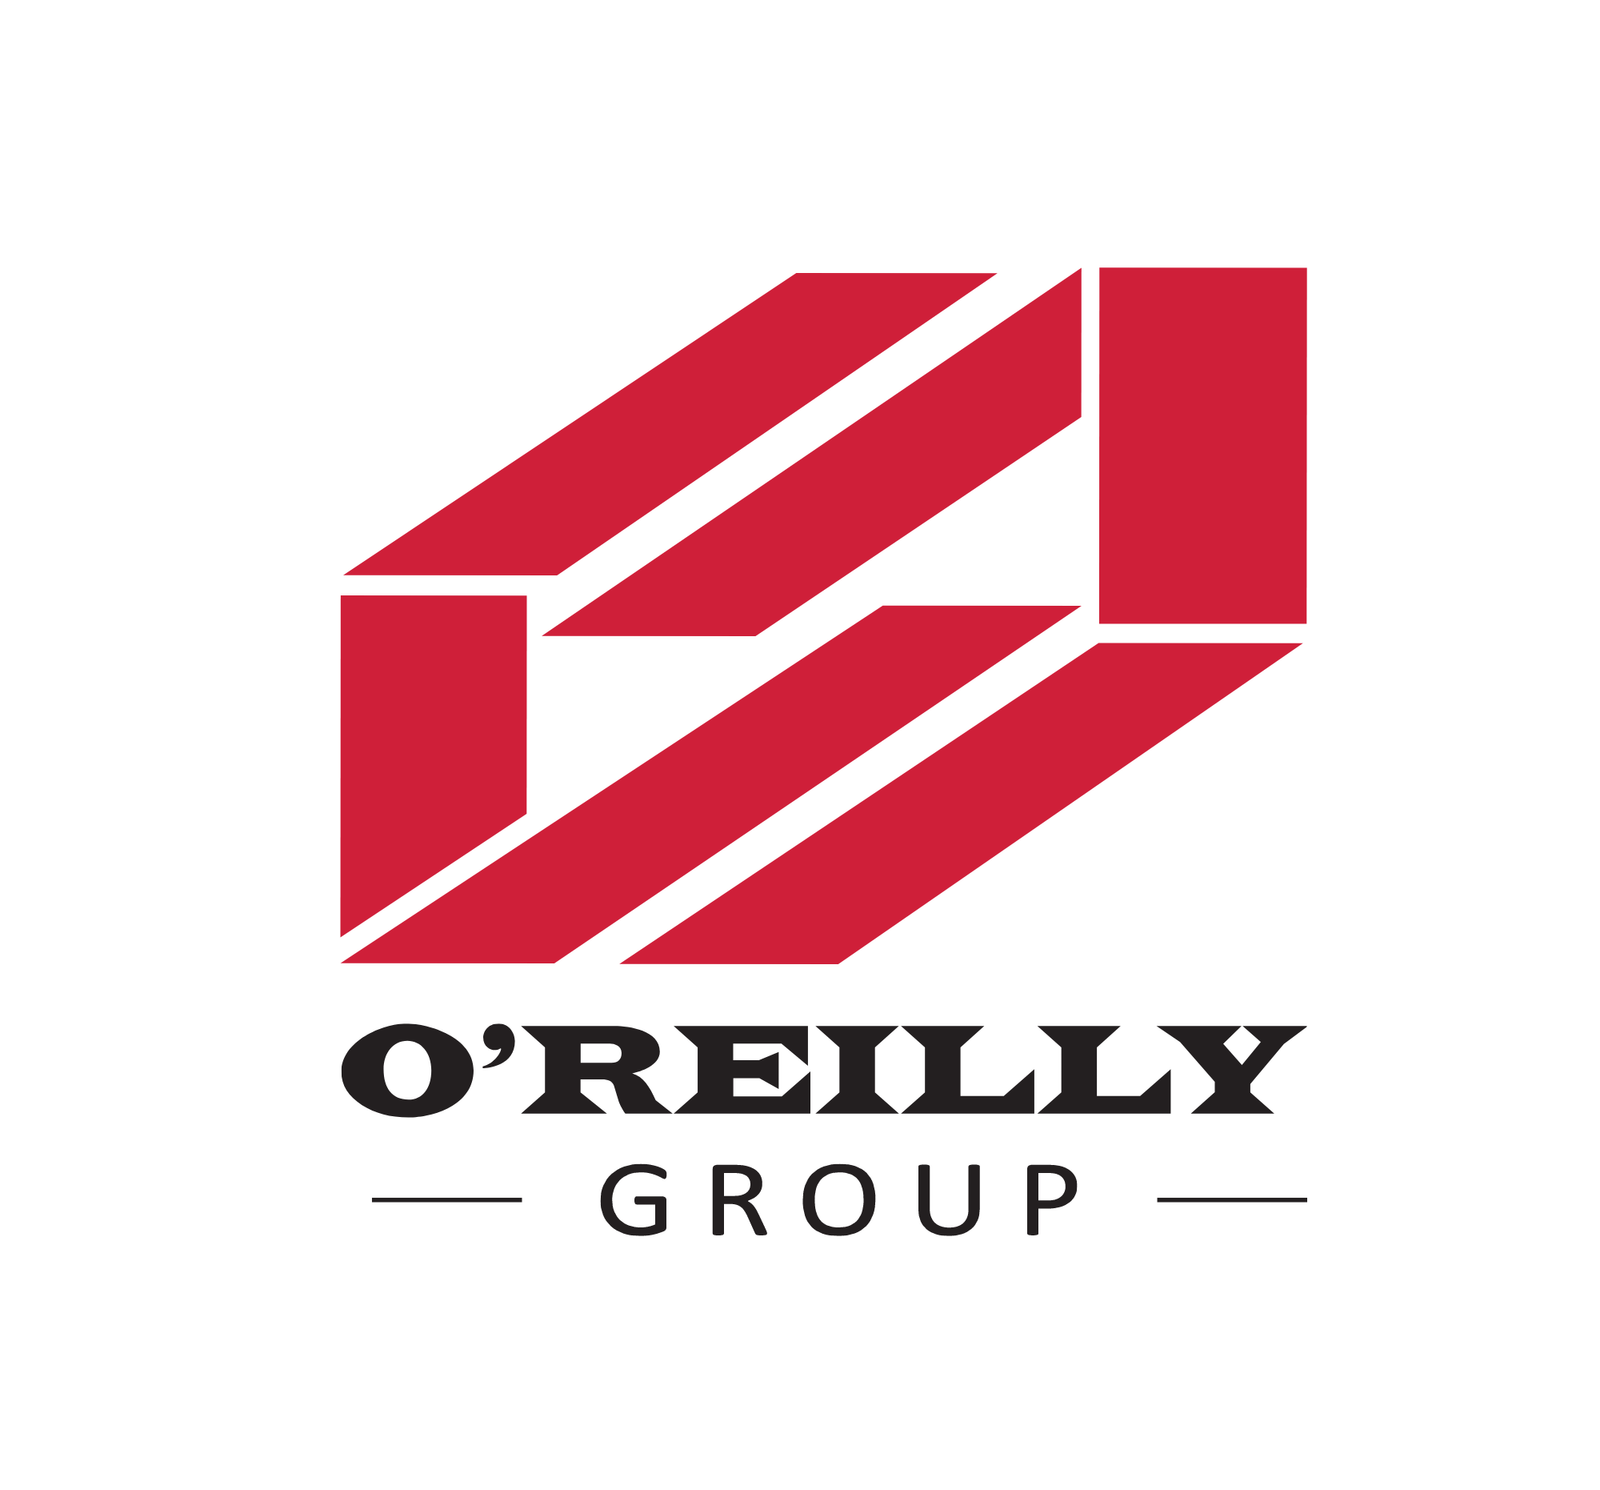 The O'Reilly Group